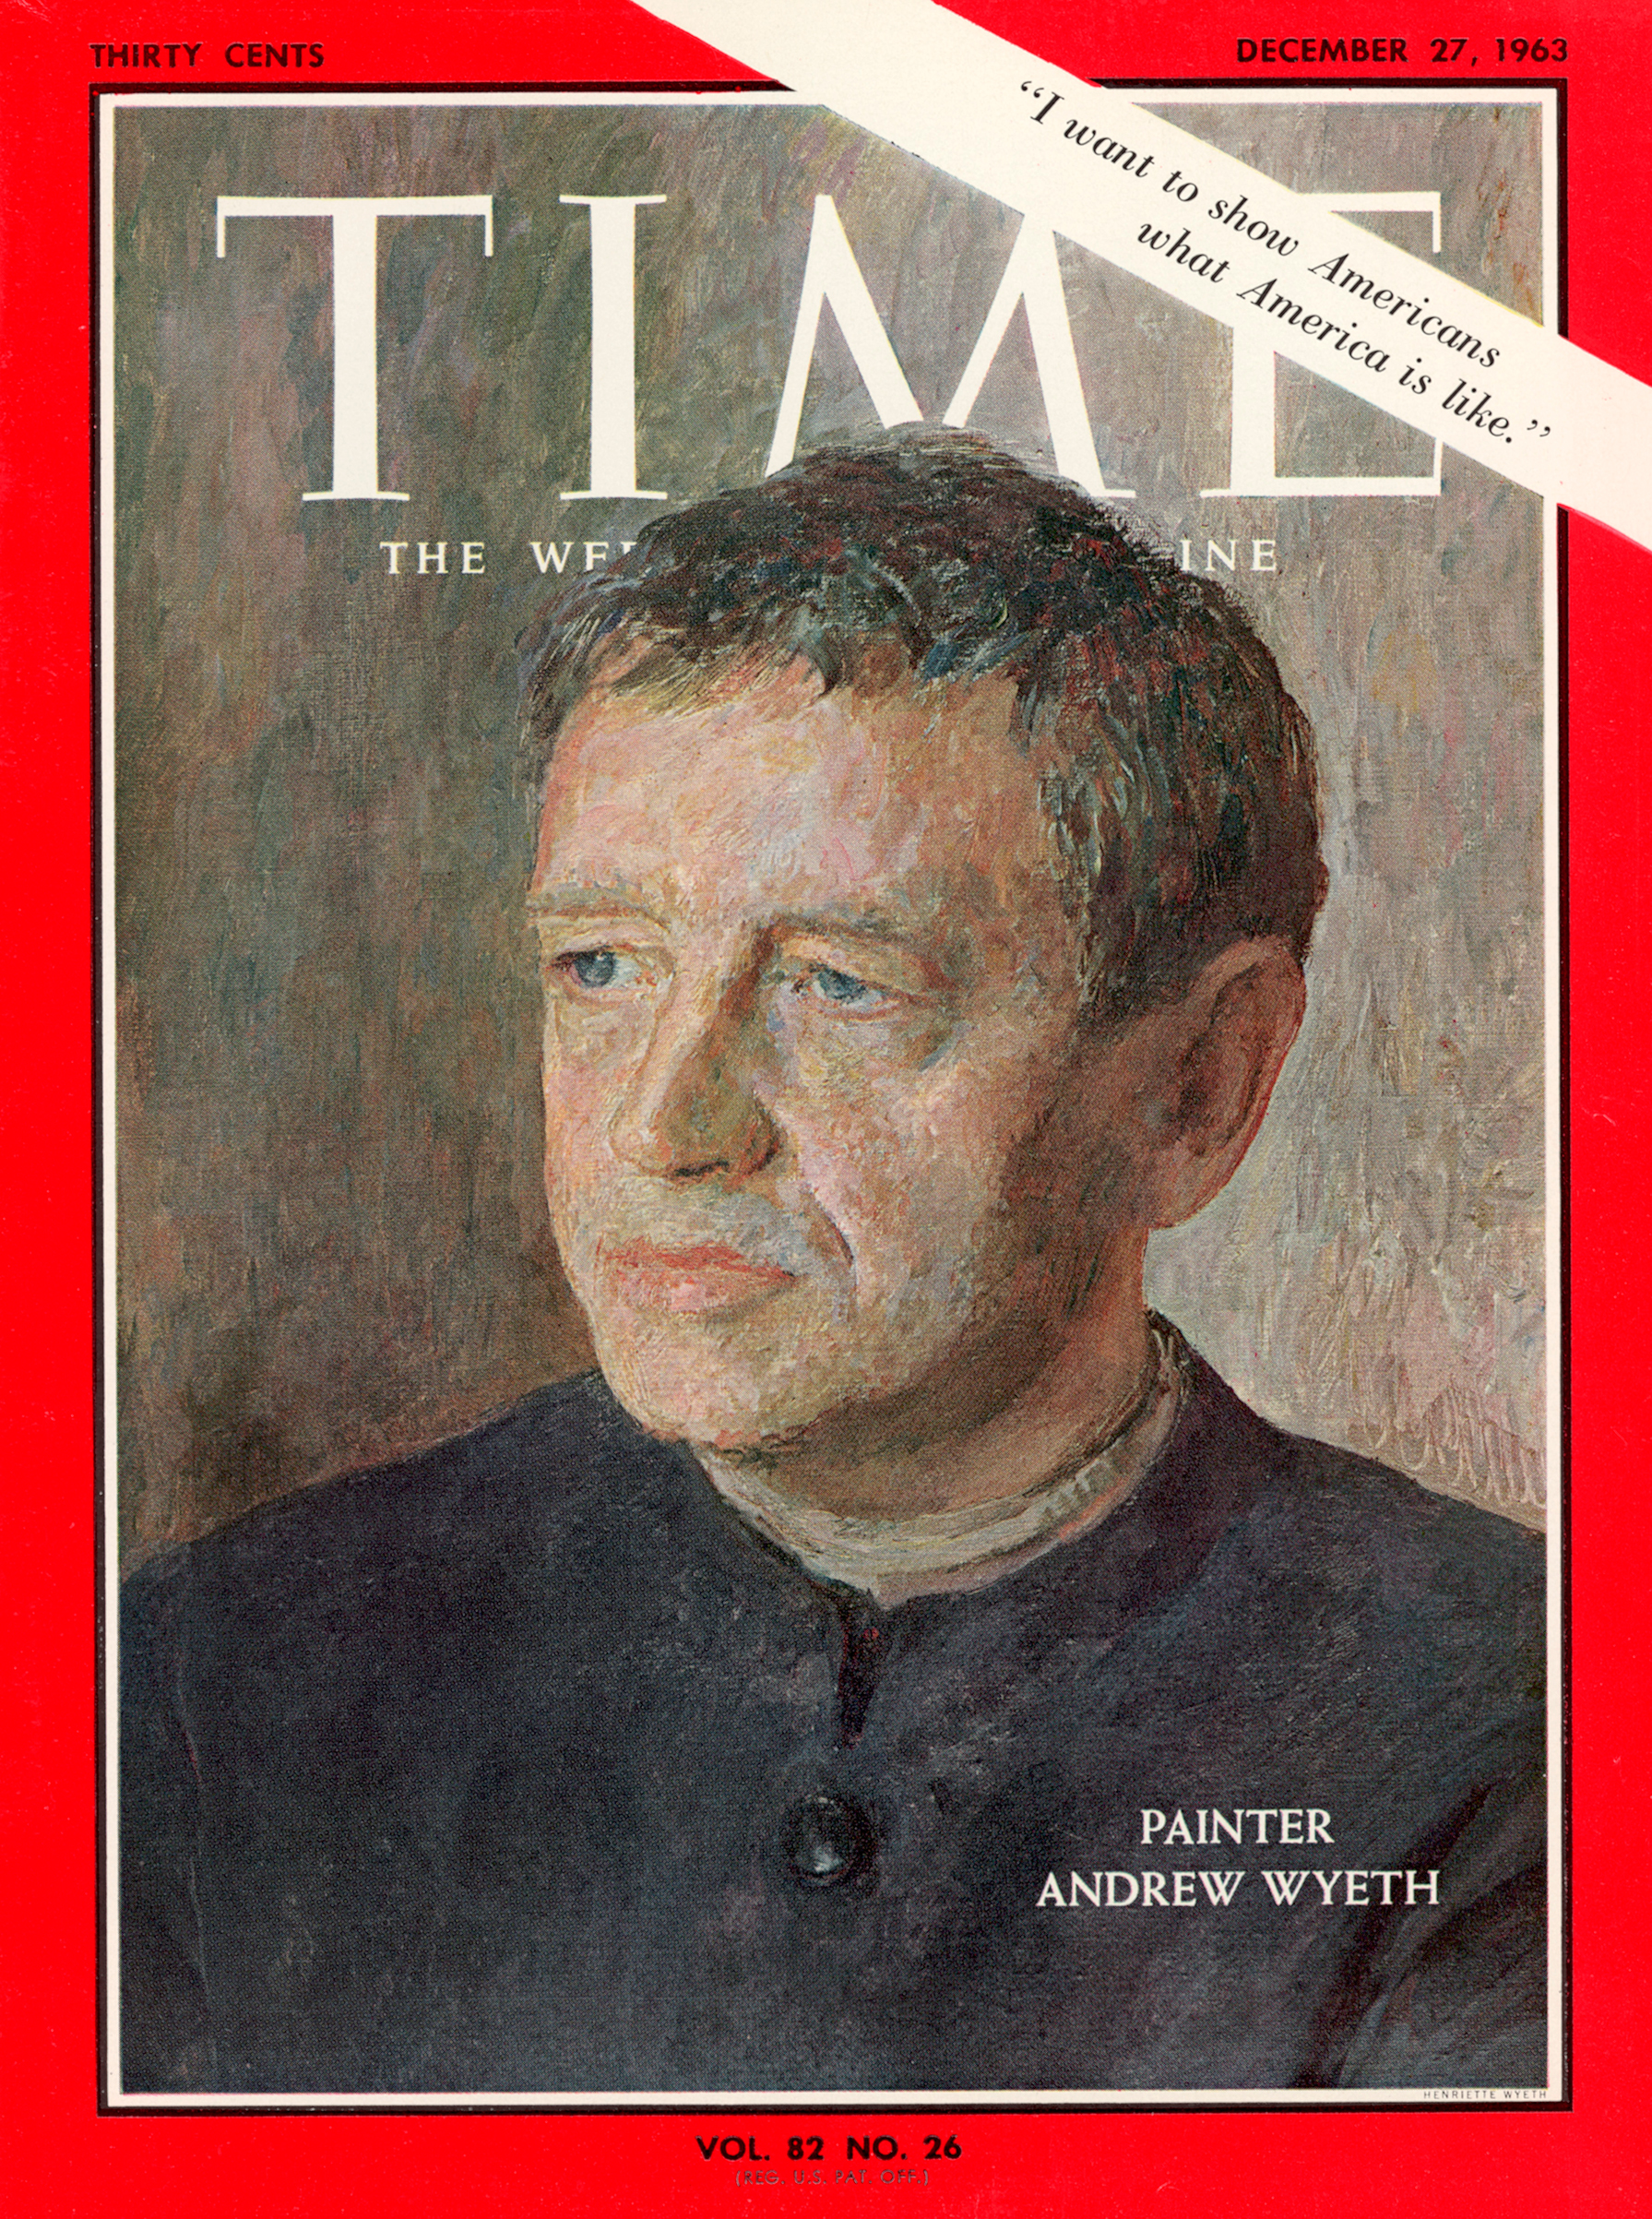 Dec. 27, 1963 TIME magazine cover with painting of artist Andrew Wyeth by his sister Henriette Hurd. (TIME Magazine)